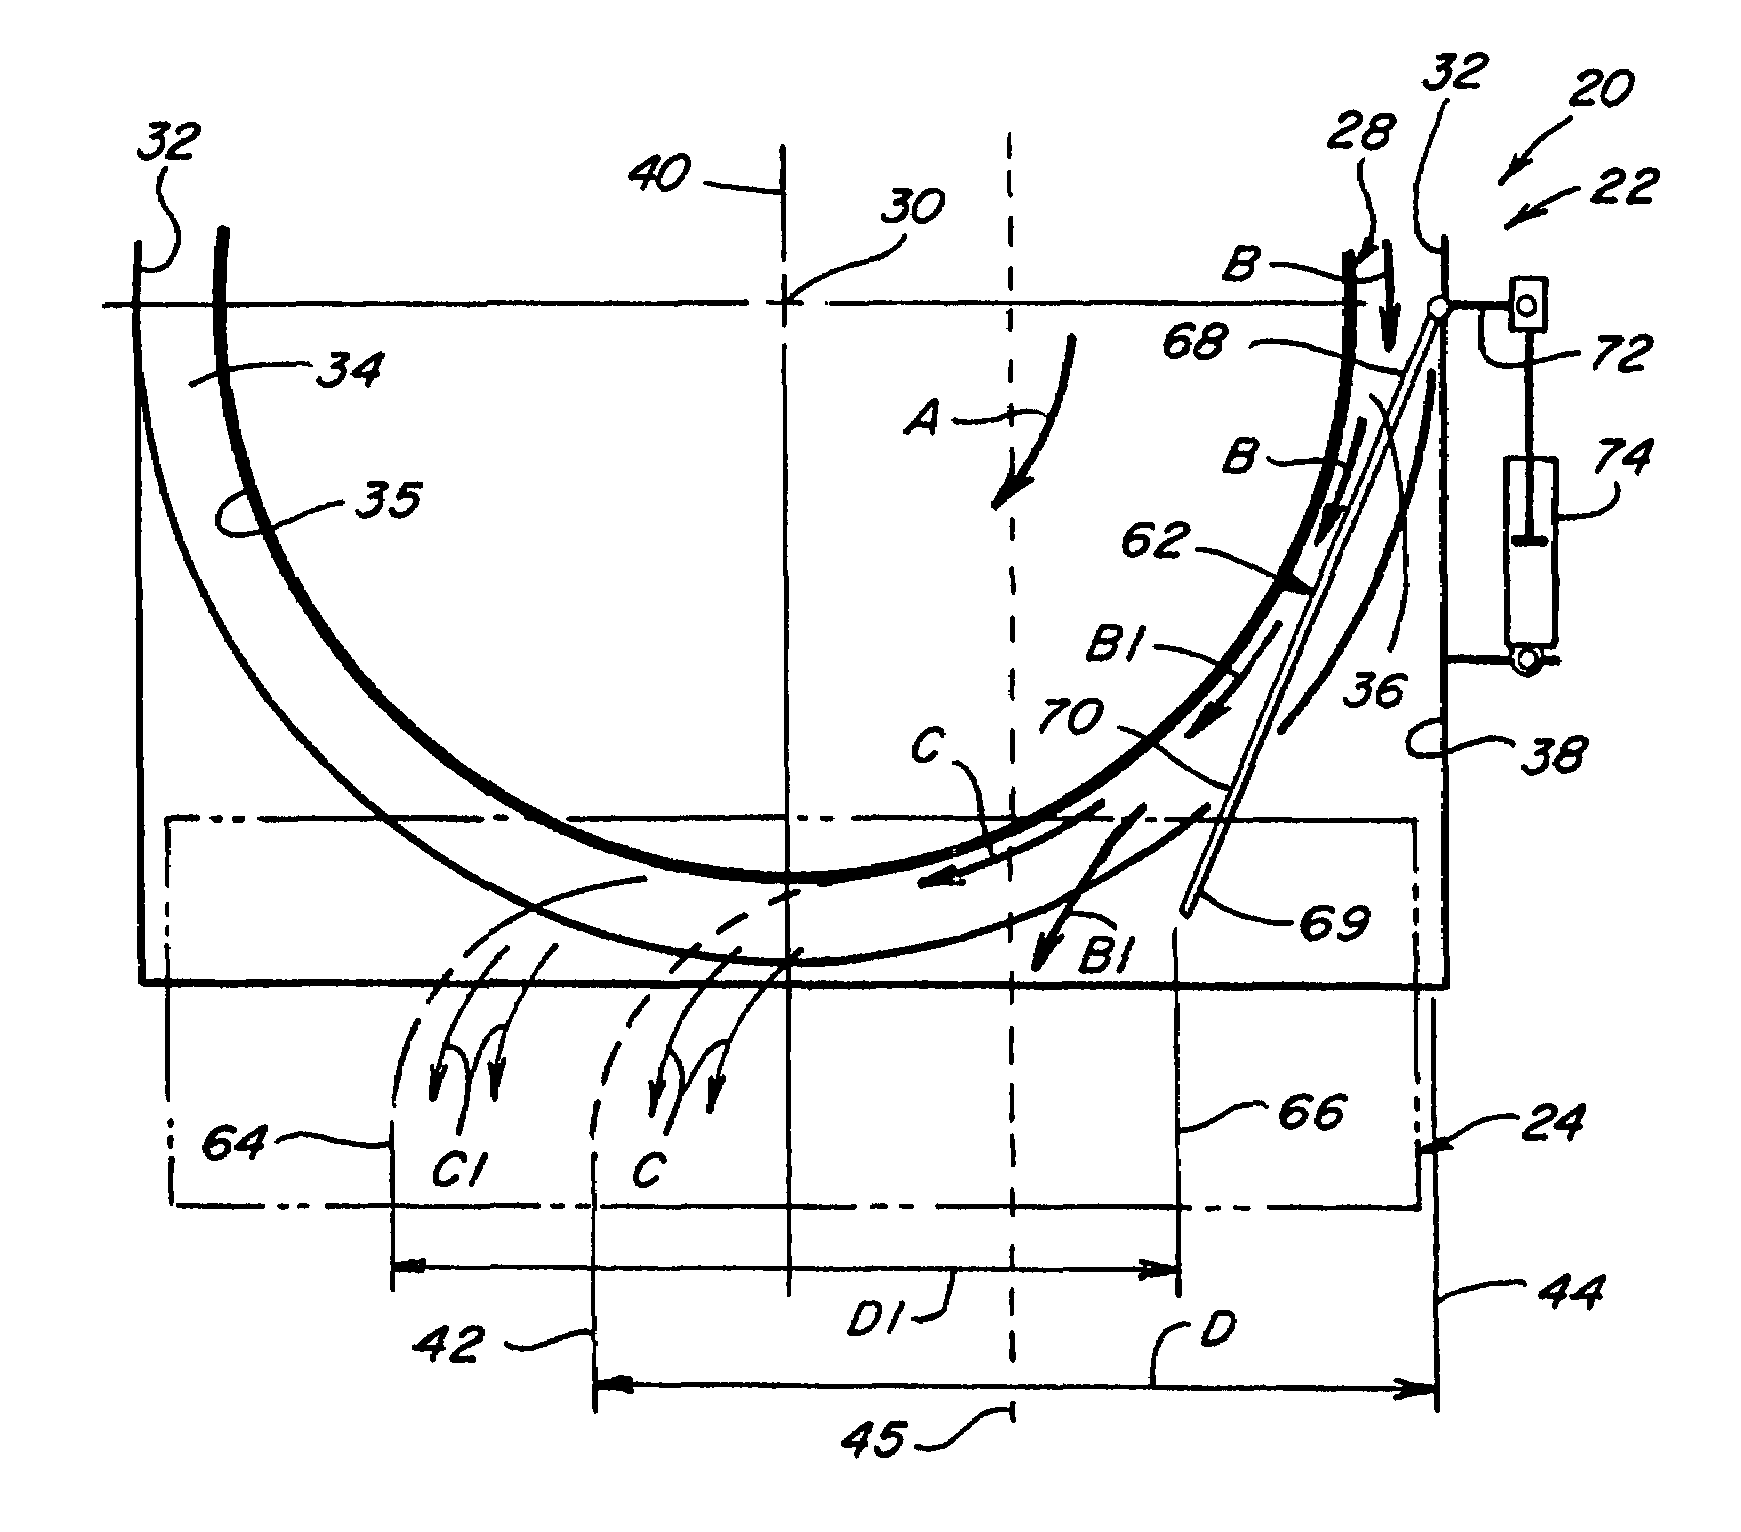 Control system for an adjustable deflector